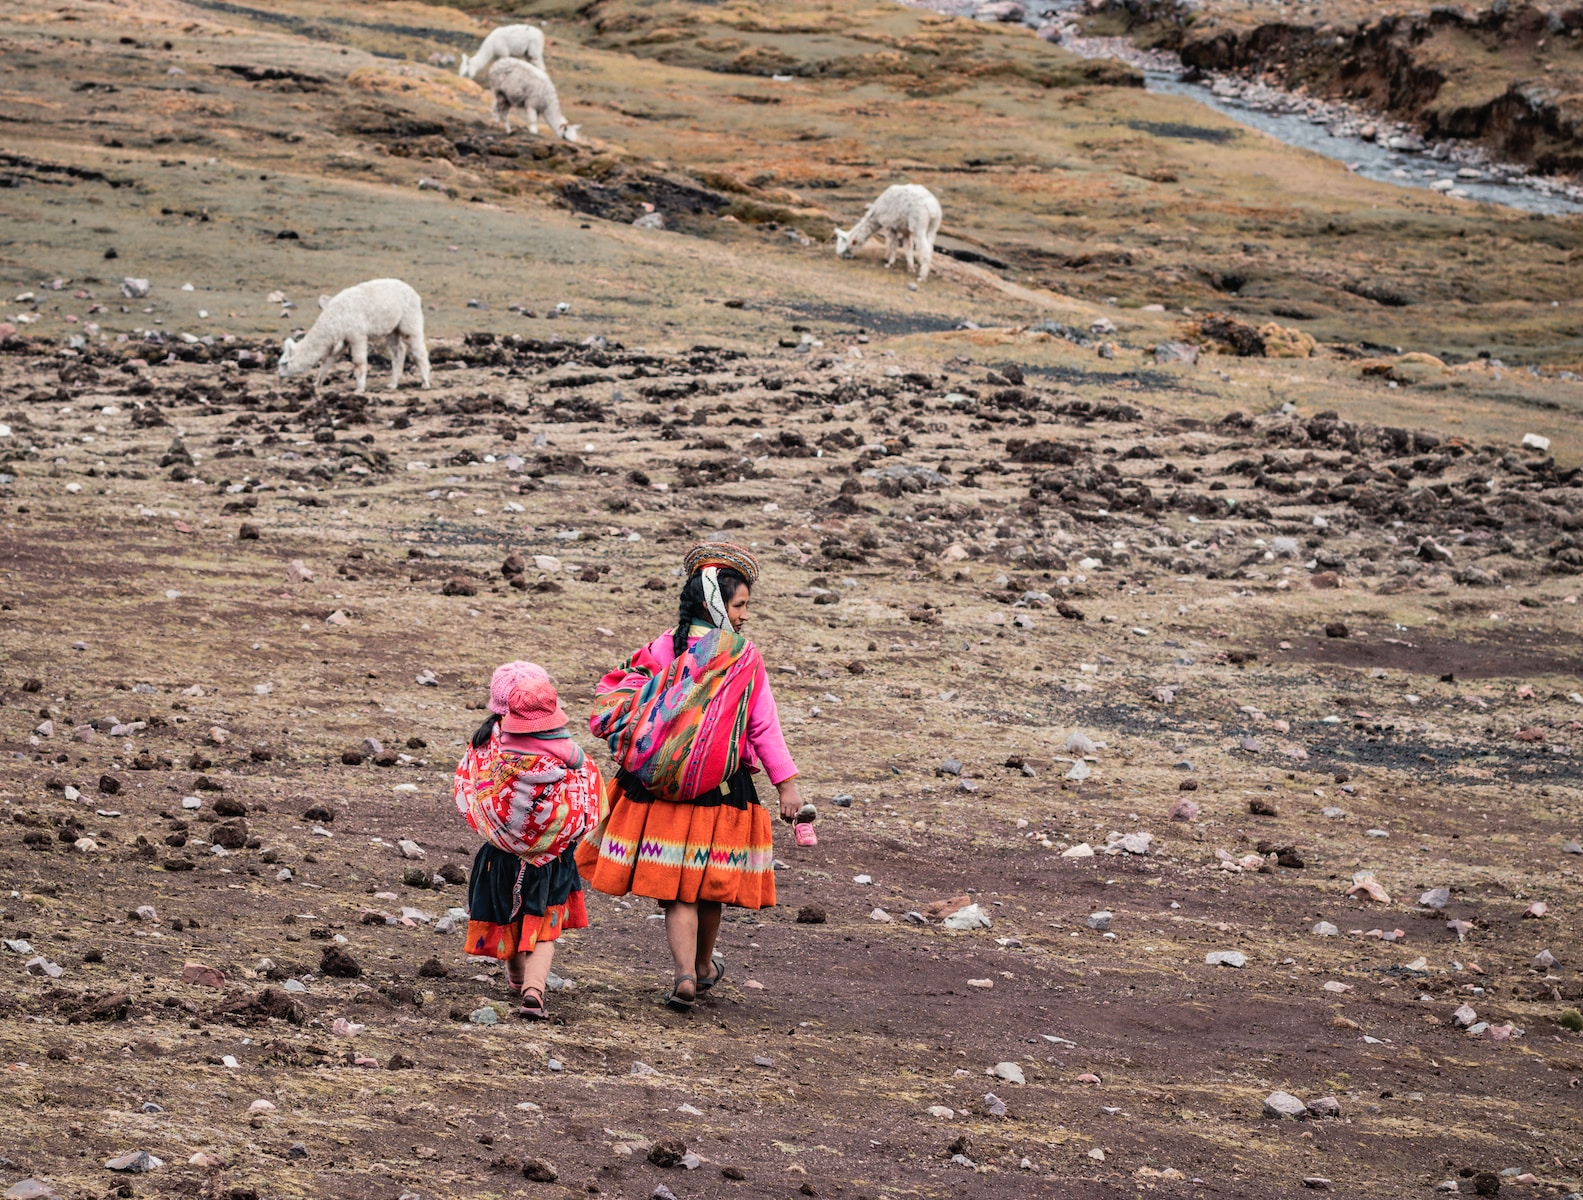 a woman and child are walking through a field with sheep